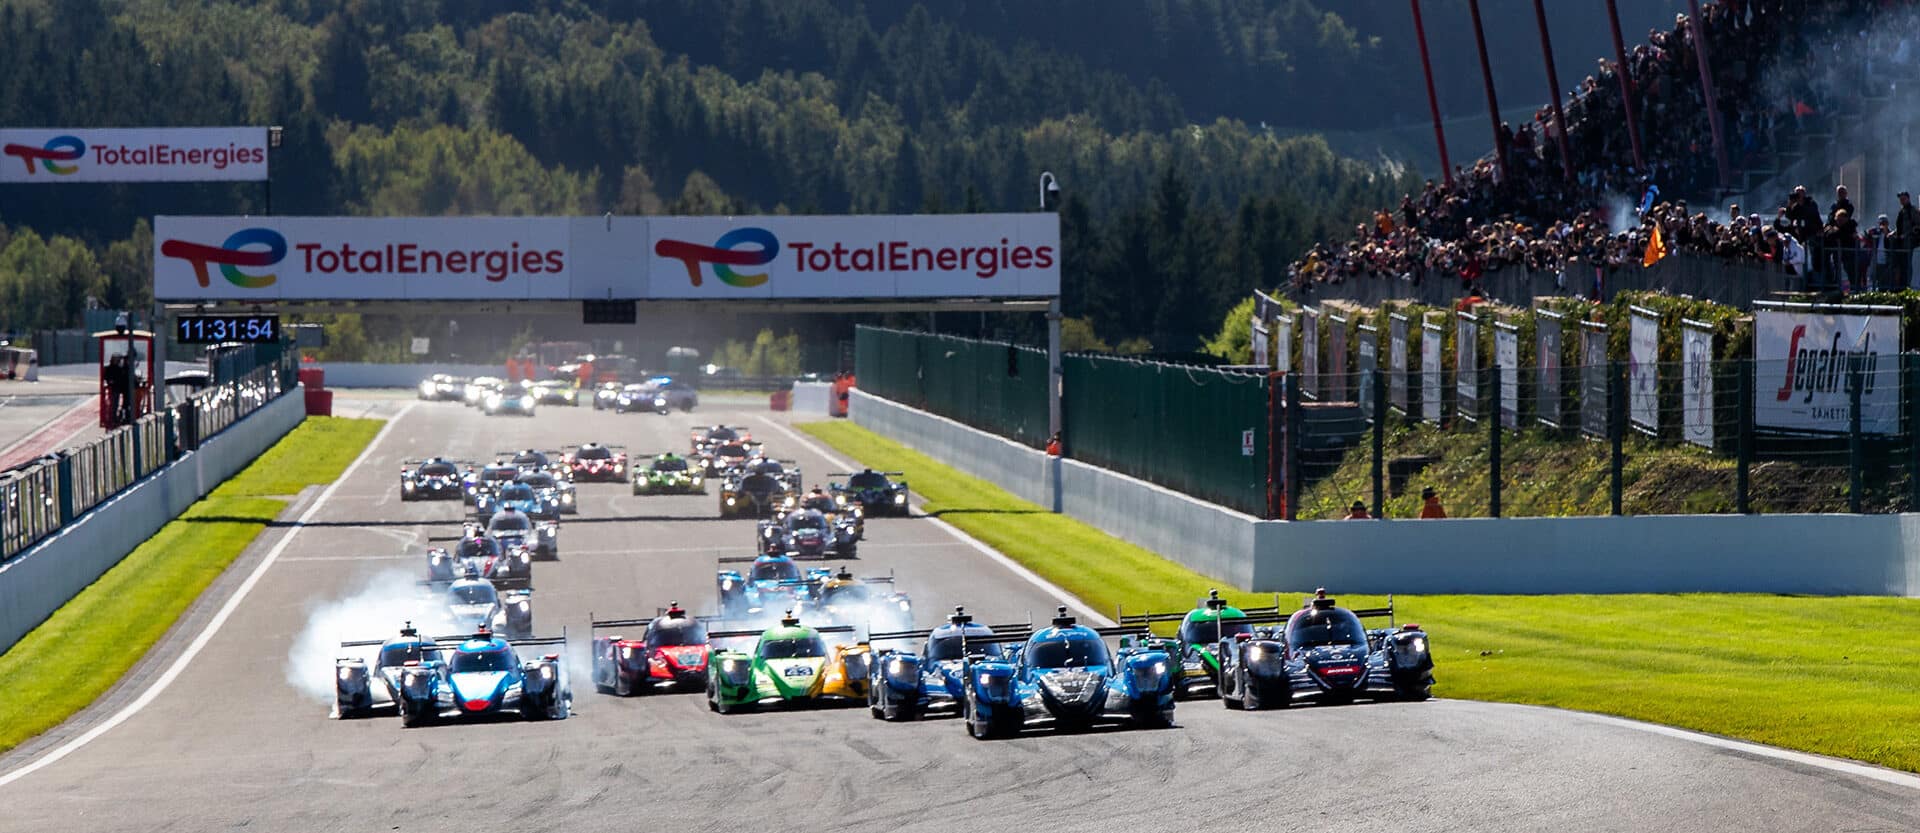 - 4 Hours of SPA: ALGARVE PRO RACING converts Pole into the win in a chaotic race !